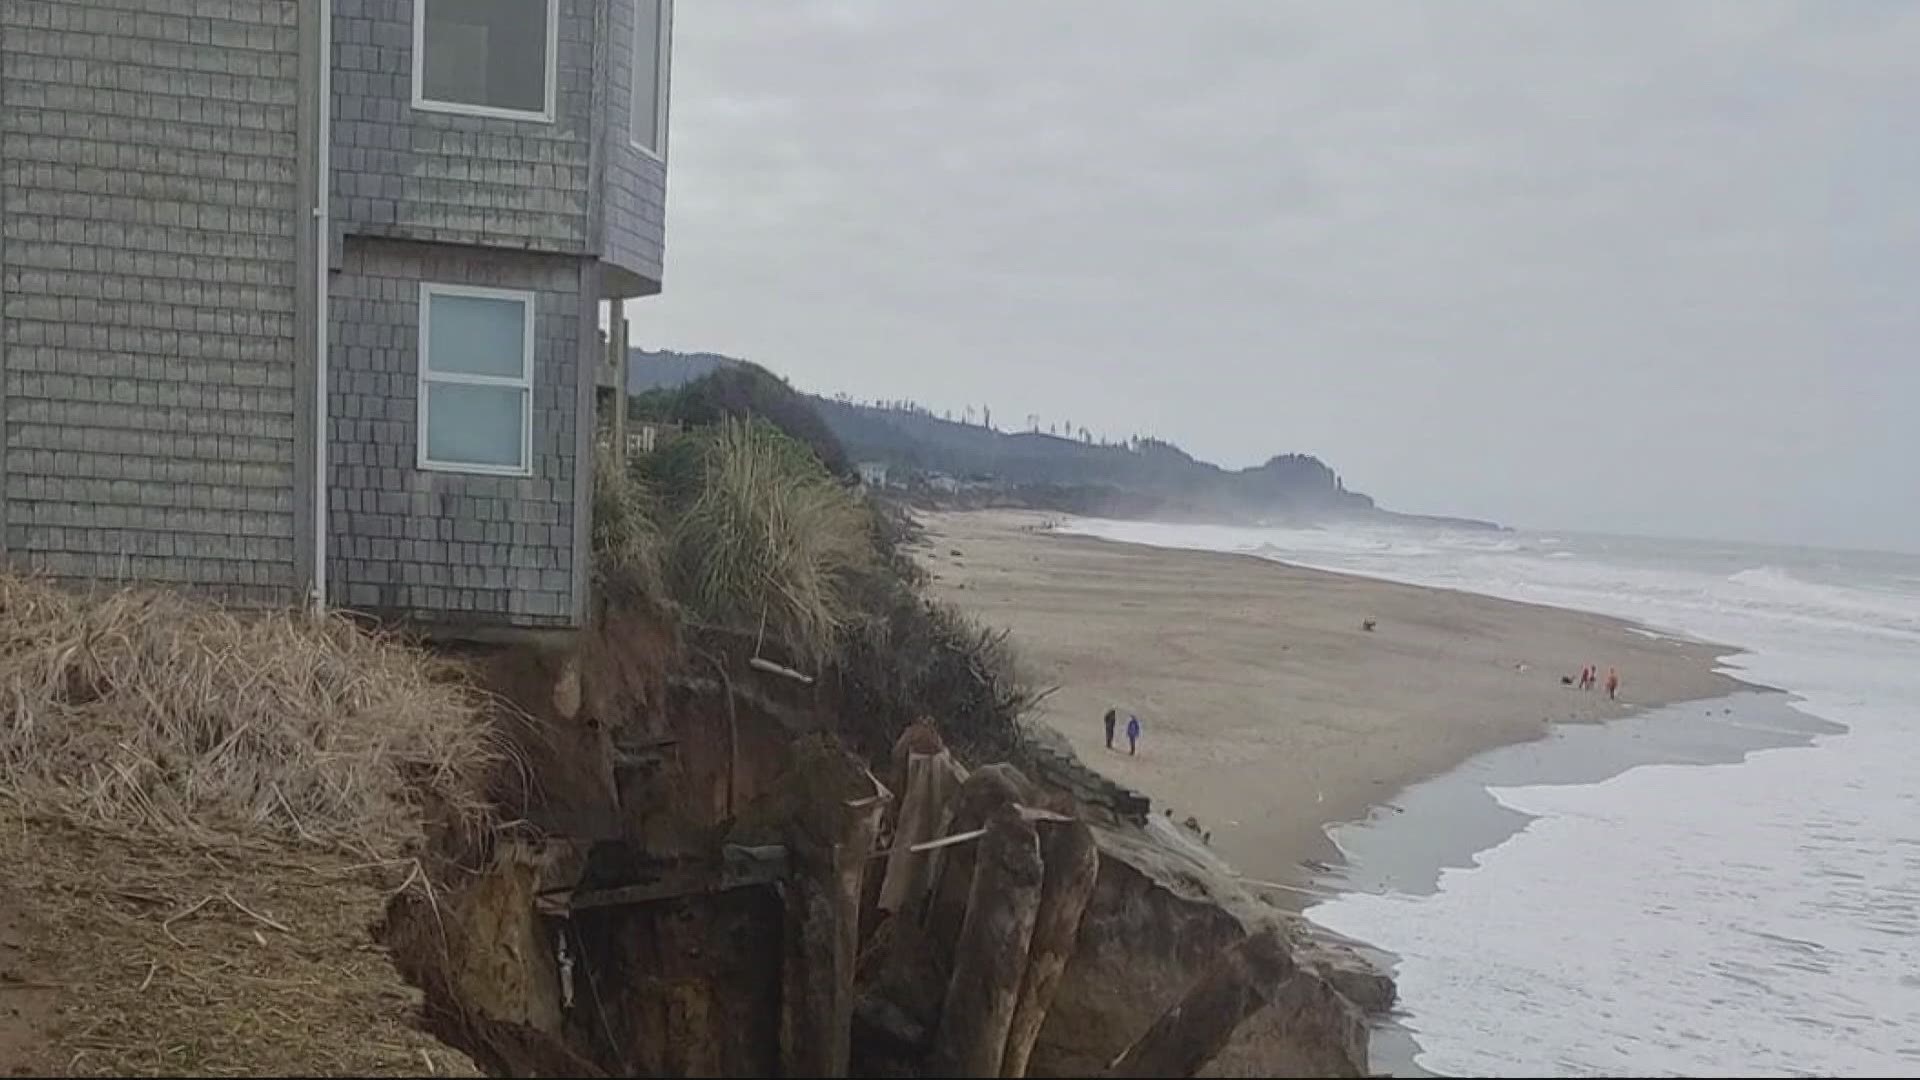 A collapse of a seawall is threatening homes on the Oregon coast. As Keely Chalmers reports, one of them is hanging over a cliff.